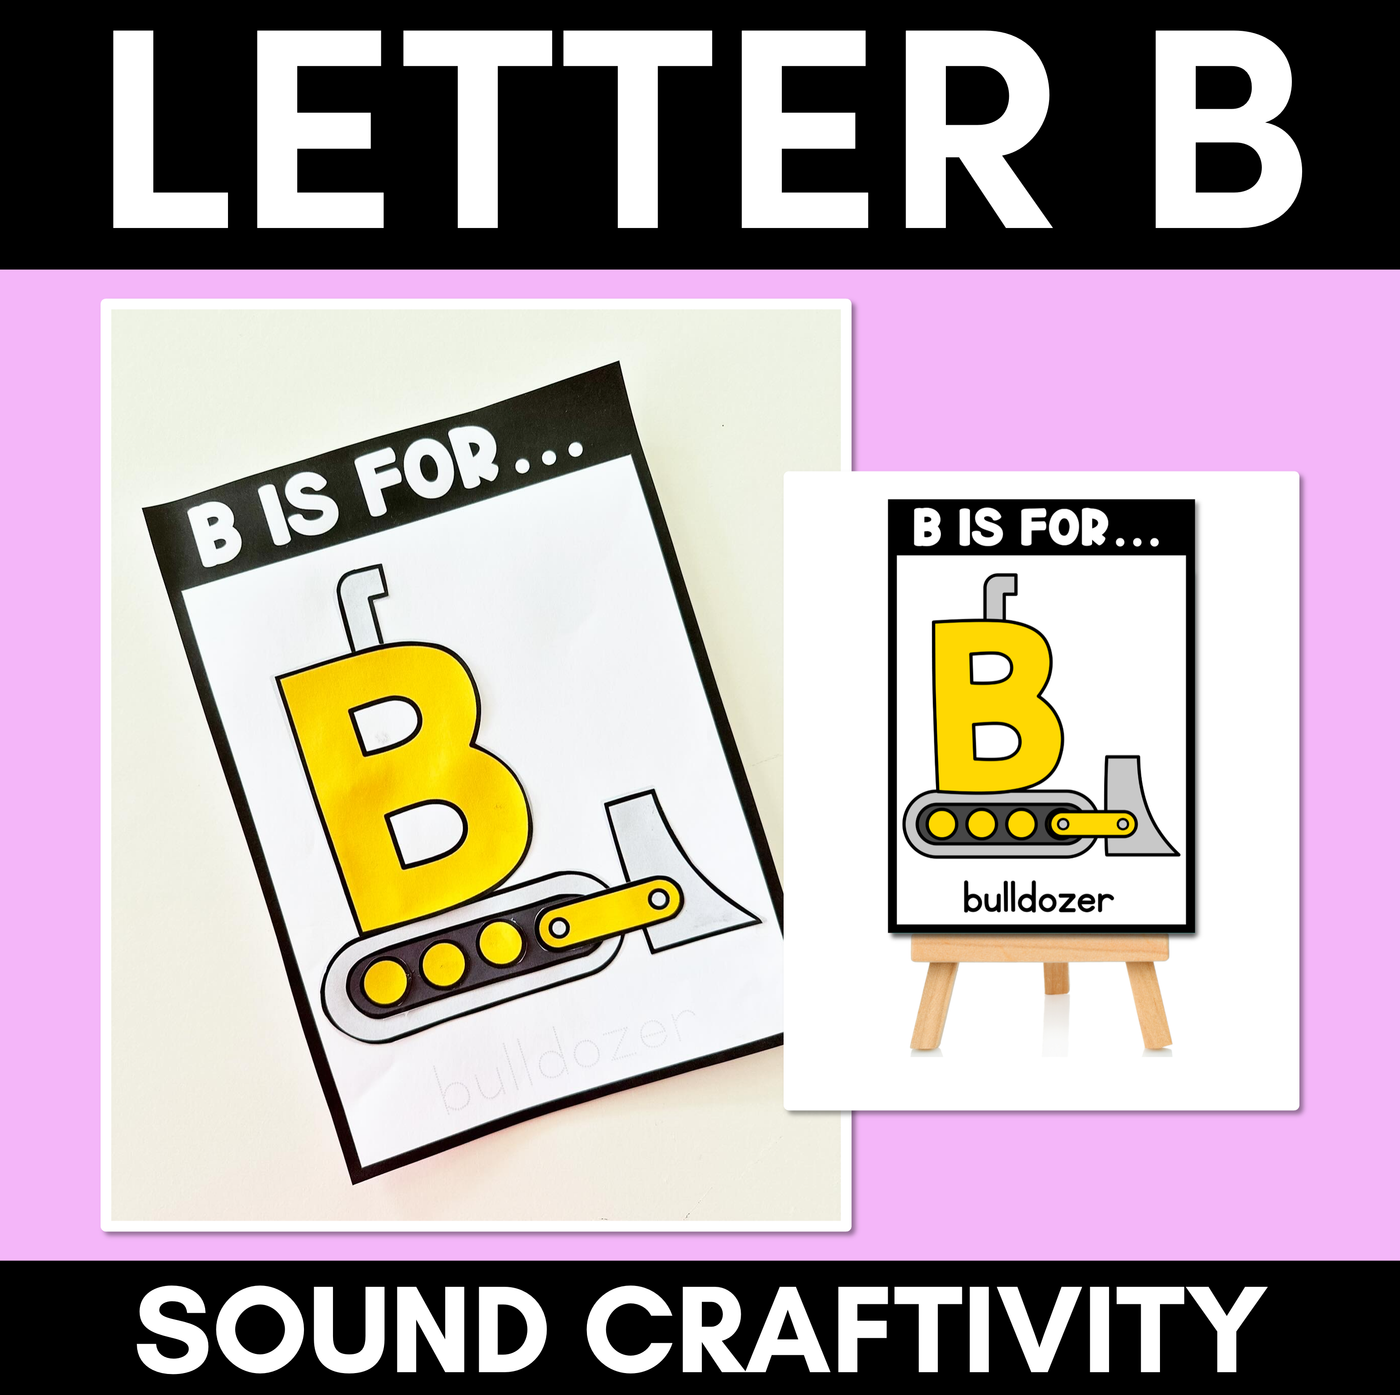 Beginning Sound Crafts - Letter B - B is for Bulldozer